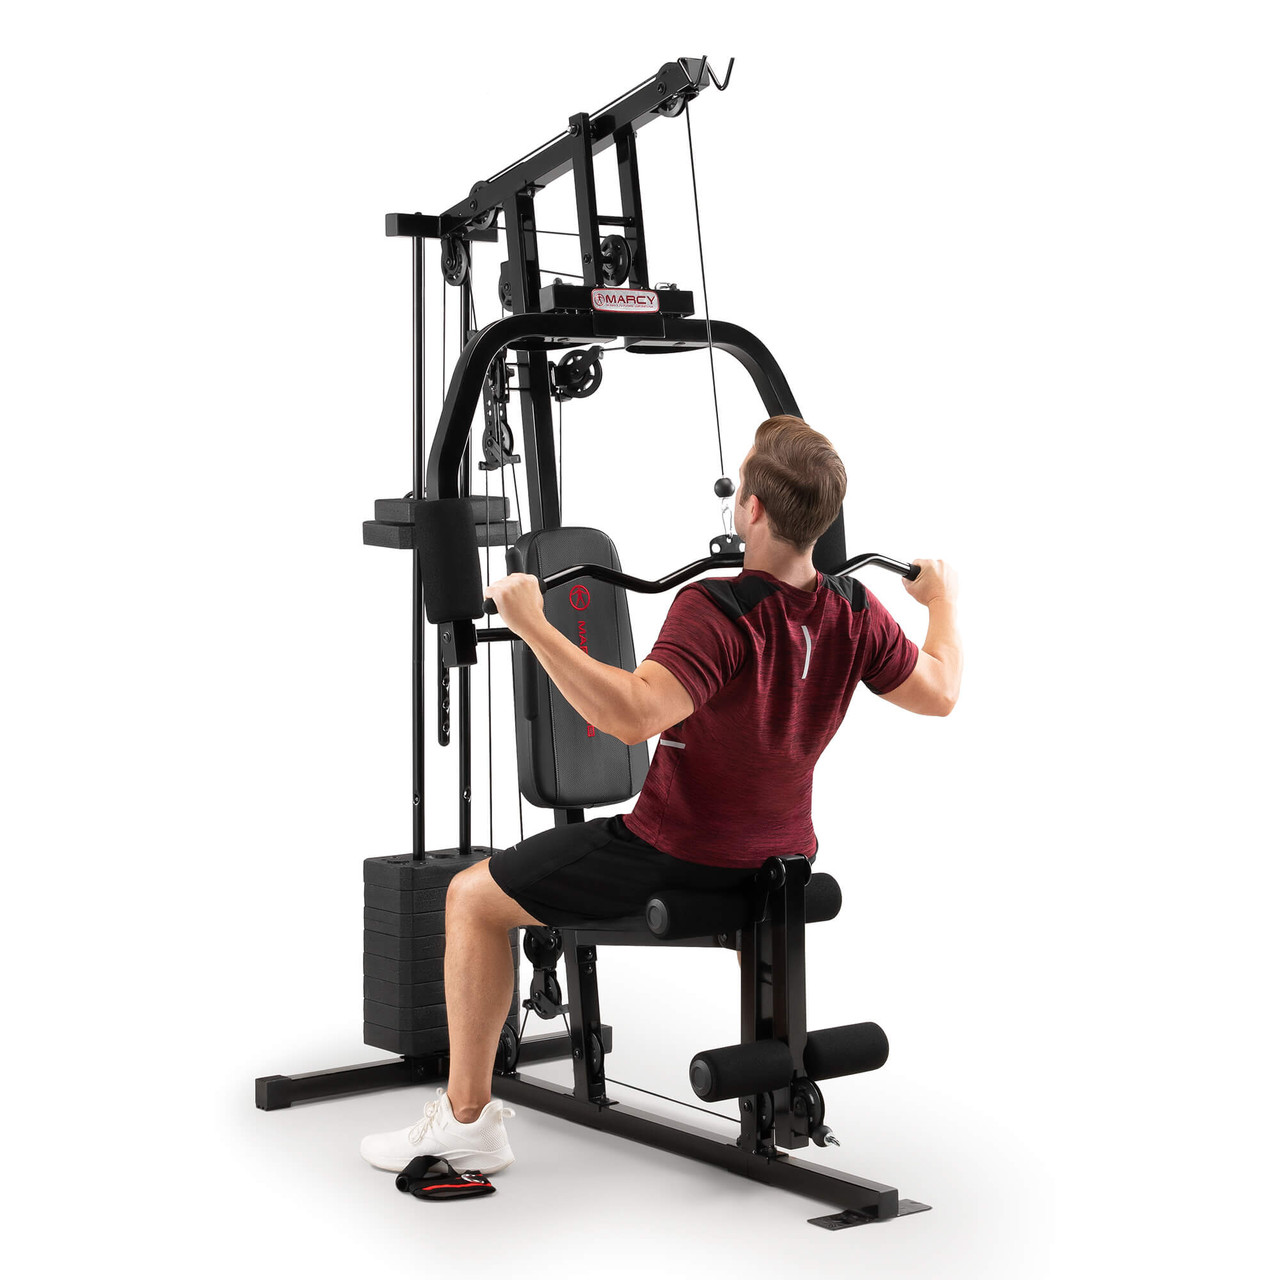 https://cdn11.bigcommerce.com/s-r2fl439k1s/images/stencil/1280x1280/products/136/4462/Marcy_100lb_Stack_Home_Gym_MKM-81030_-_Male_Model_using_Upper_Pulley_with_Lat_Bar_for_Lat_Bar_Pulldowns__81981.1703023807.jpg?c=2